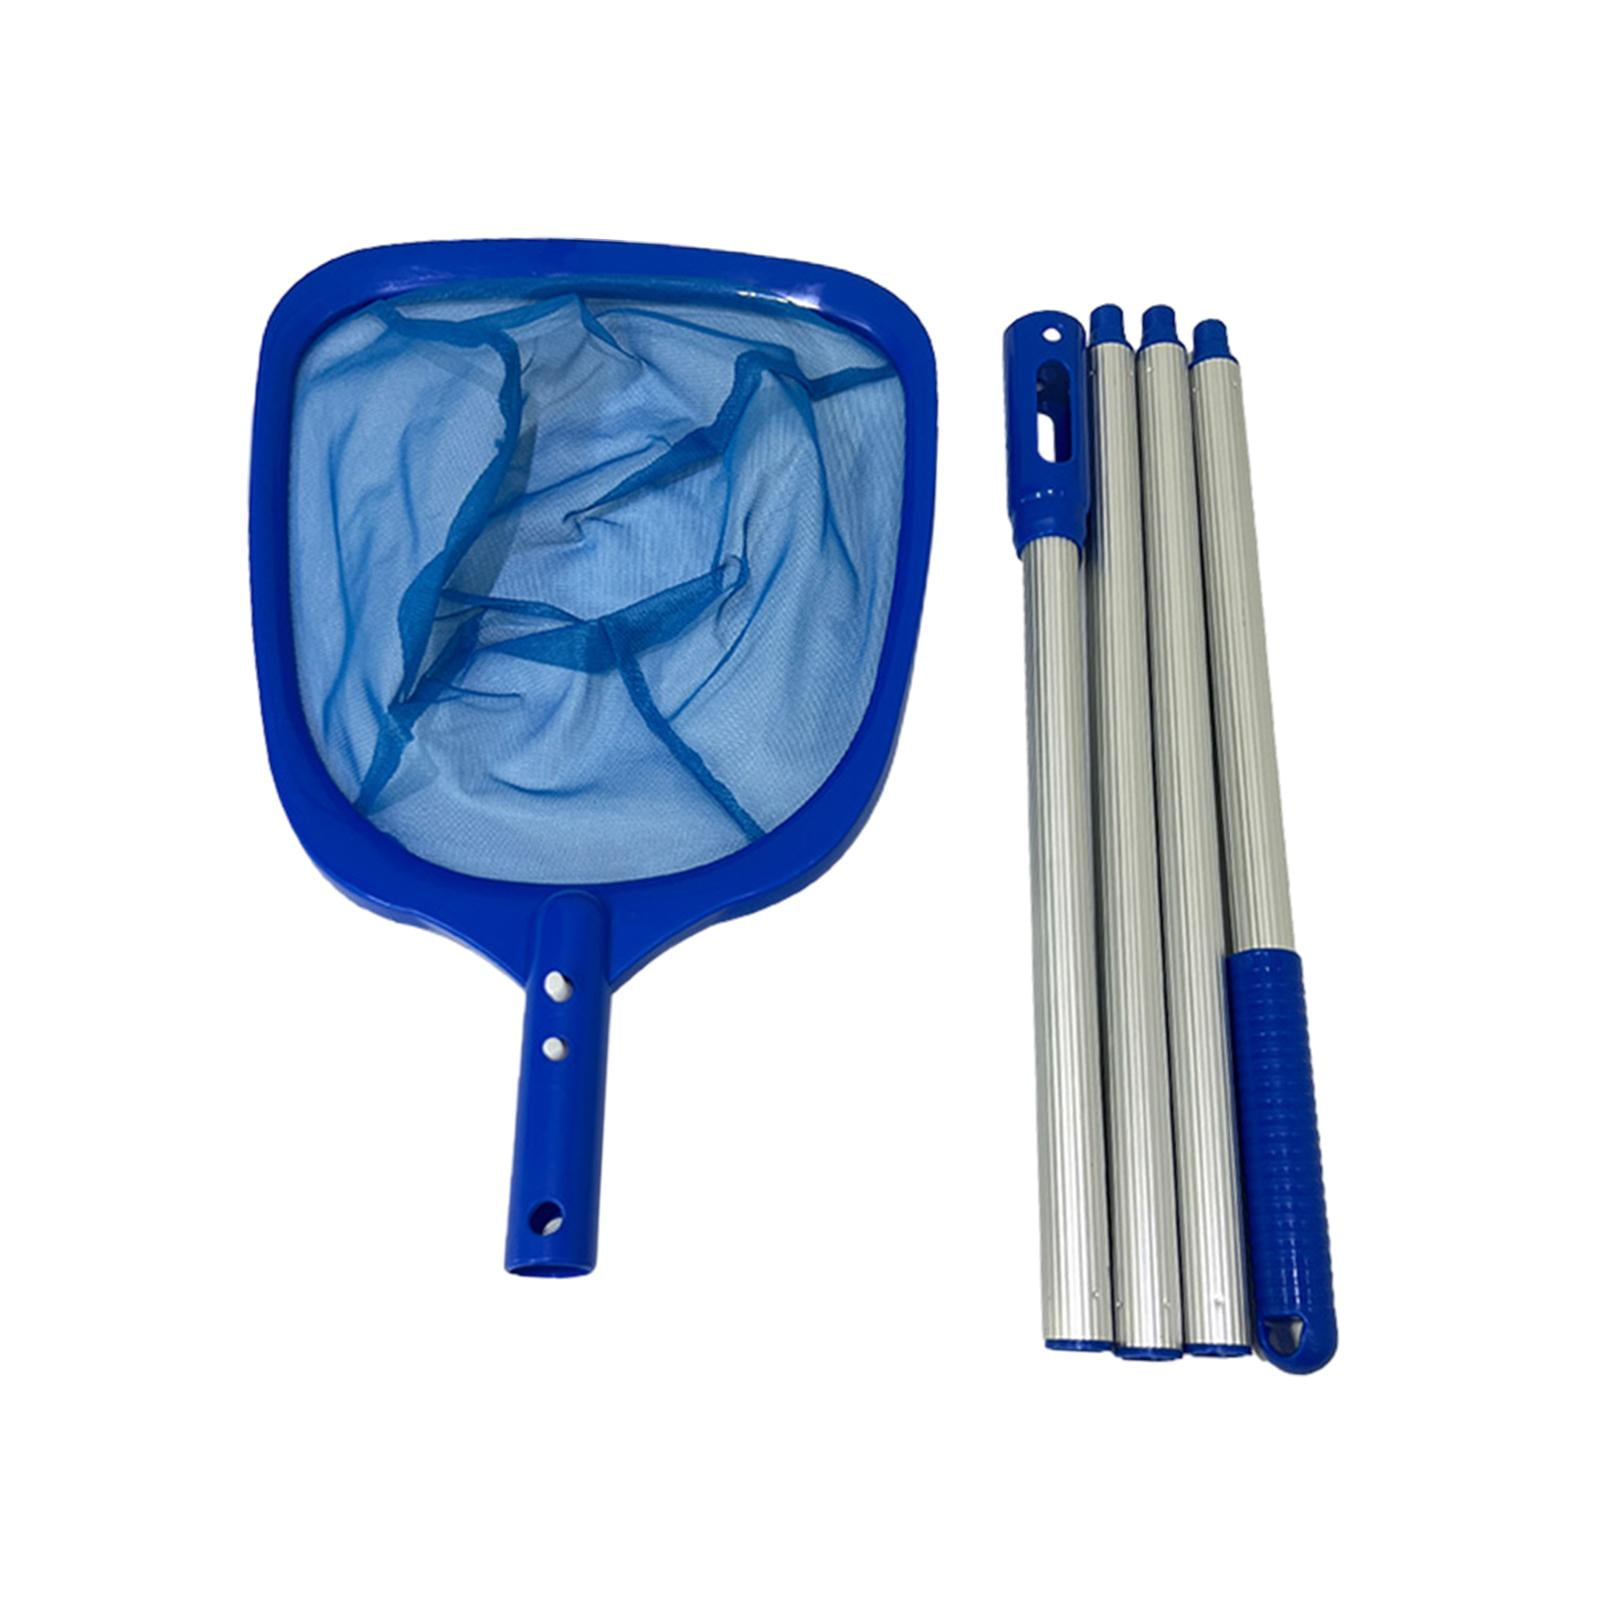 Pool Skimmer Net, Pool Nets, Fast Cleaning, Professional Fine Mesh Netting  Leaf Skimmer Net for Pond Cleaning, Maintenance